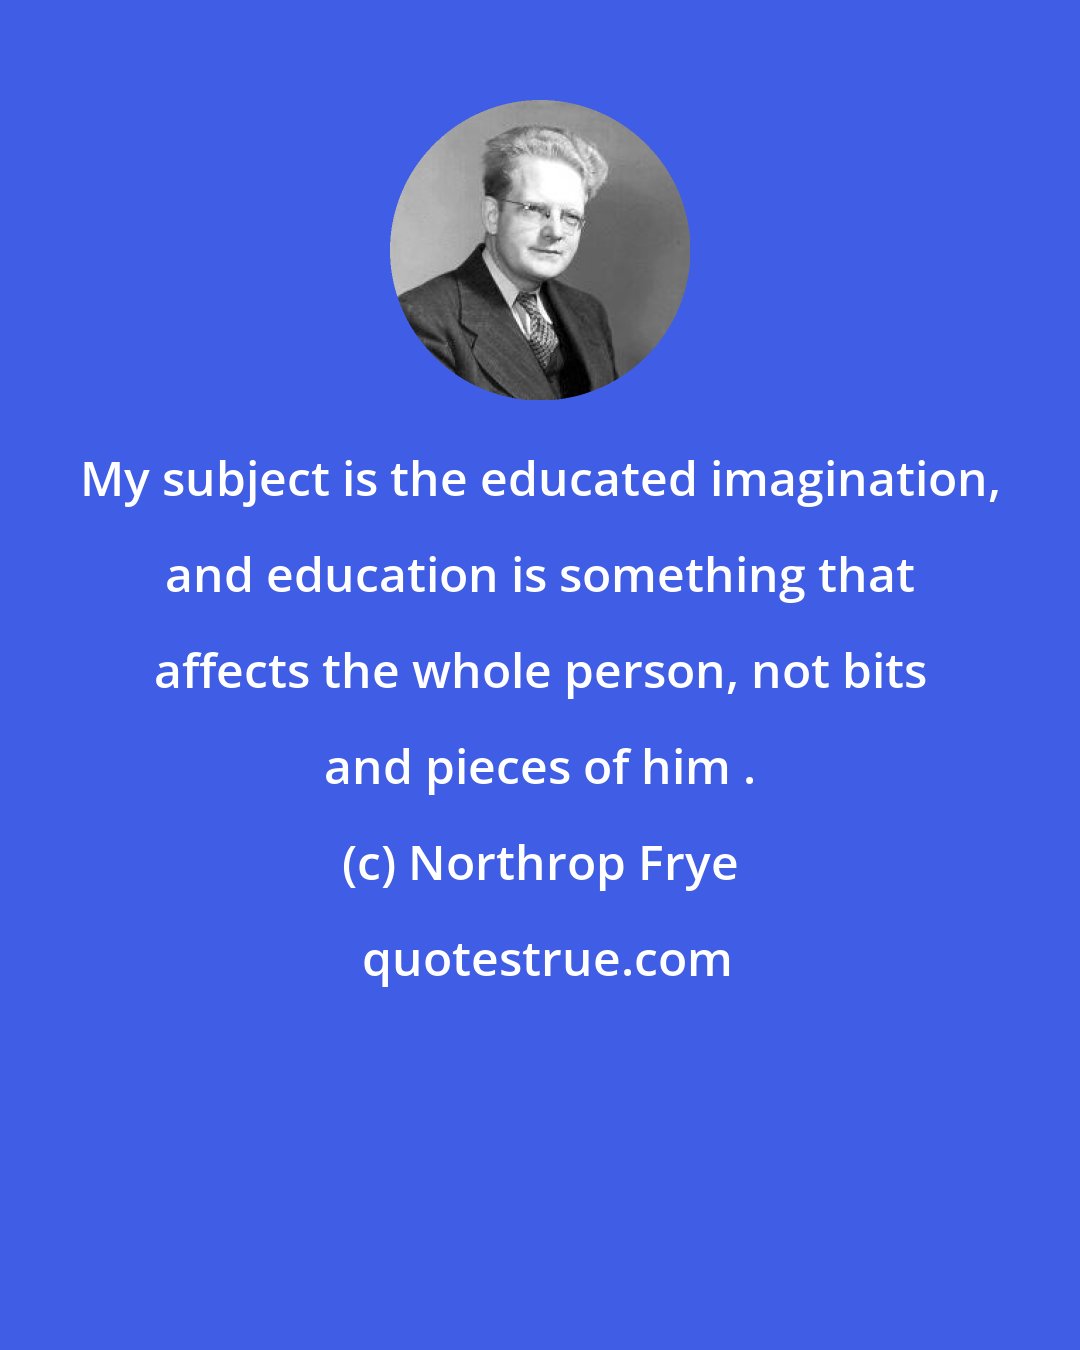 Northrop Frye: My subject is the educated imagination, and education is something that affects the whole person, not bits and pieces of him .